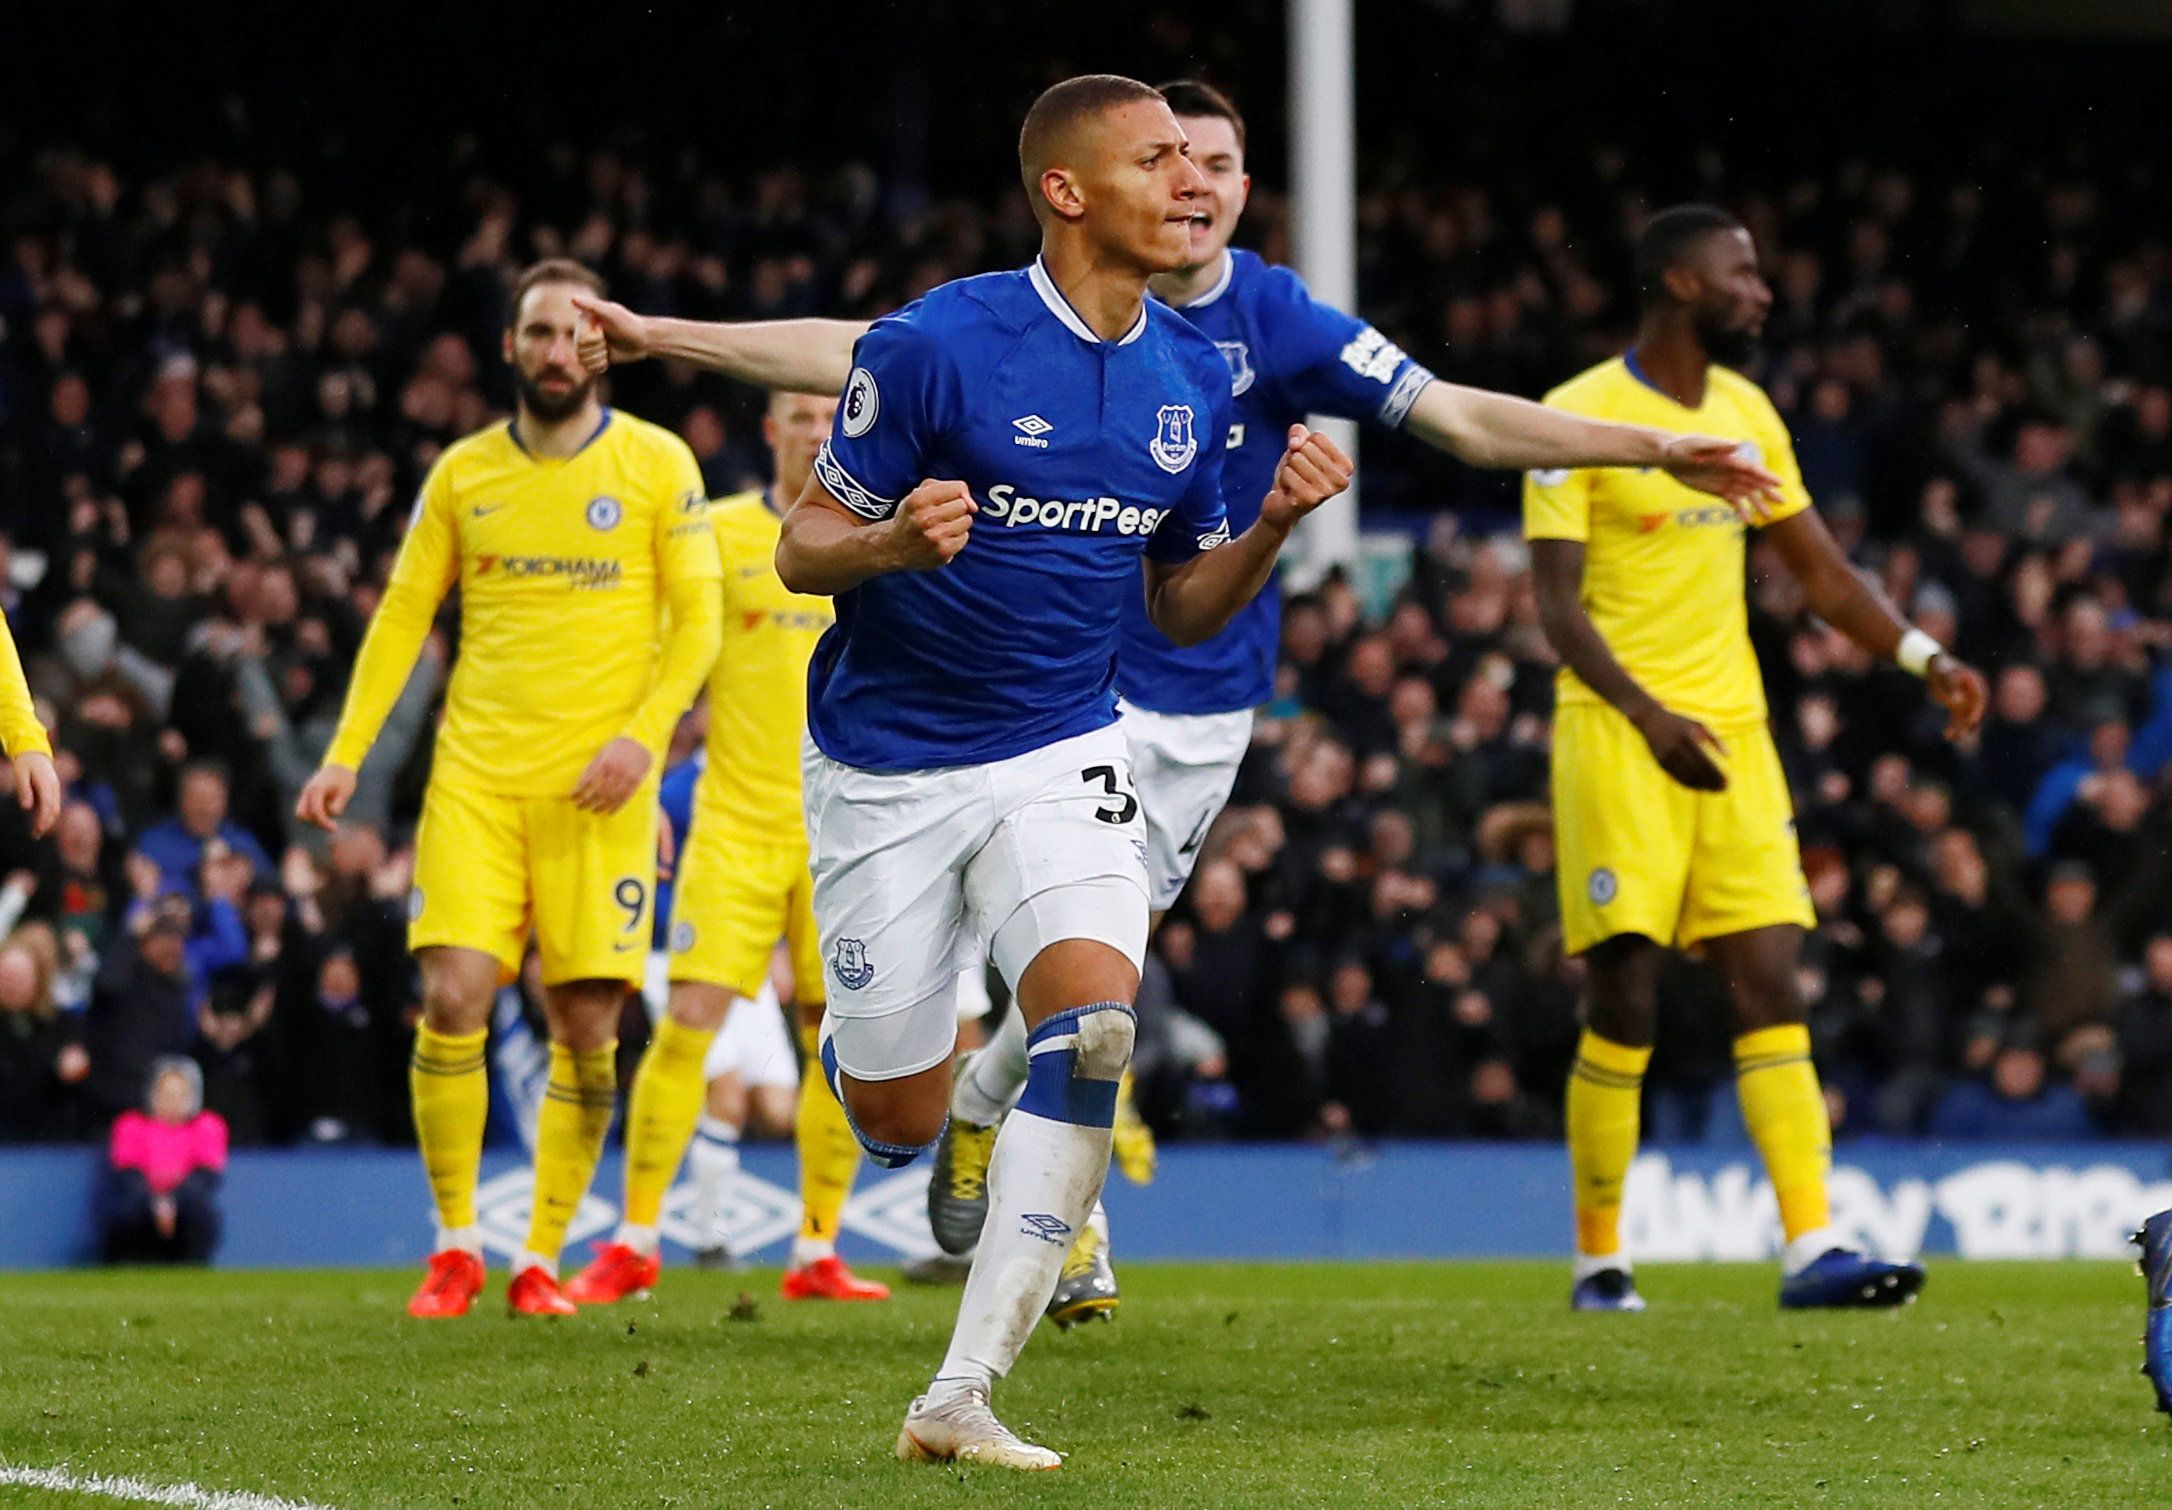 Soccer Football - Premier League - Everton v Chelsea - Goodison Park, Liverpool, Britain - March 17, 2019  Everton's Richarlison celebrates scoring their first goal  Action Images via Reuters/Jason Cairnduff  EDITORIAL USE ONLY. No use with unauthorized audio, video, data, fixture lists, club/league logos or "live" services. Online in-match use limited to 75 images, no video emulation. No use in betting, games or single club/league/player publications.  Please contact your account representative